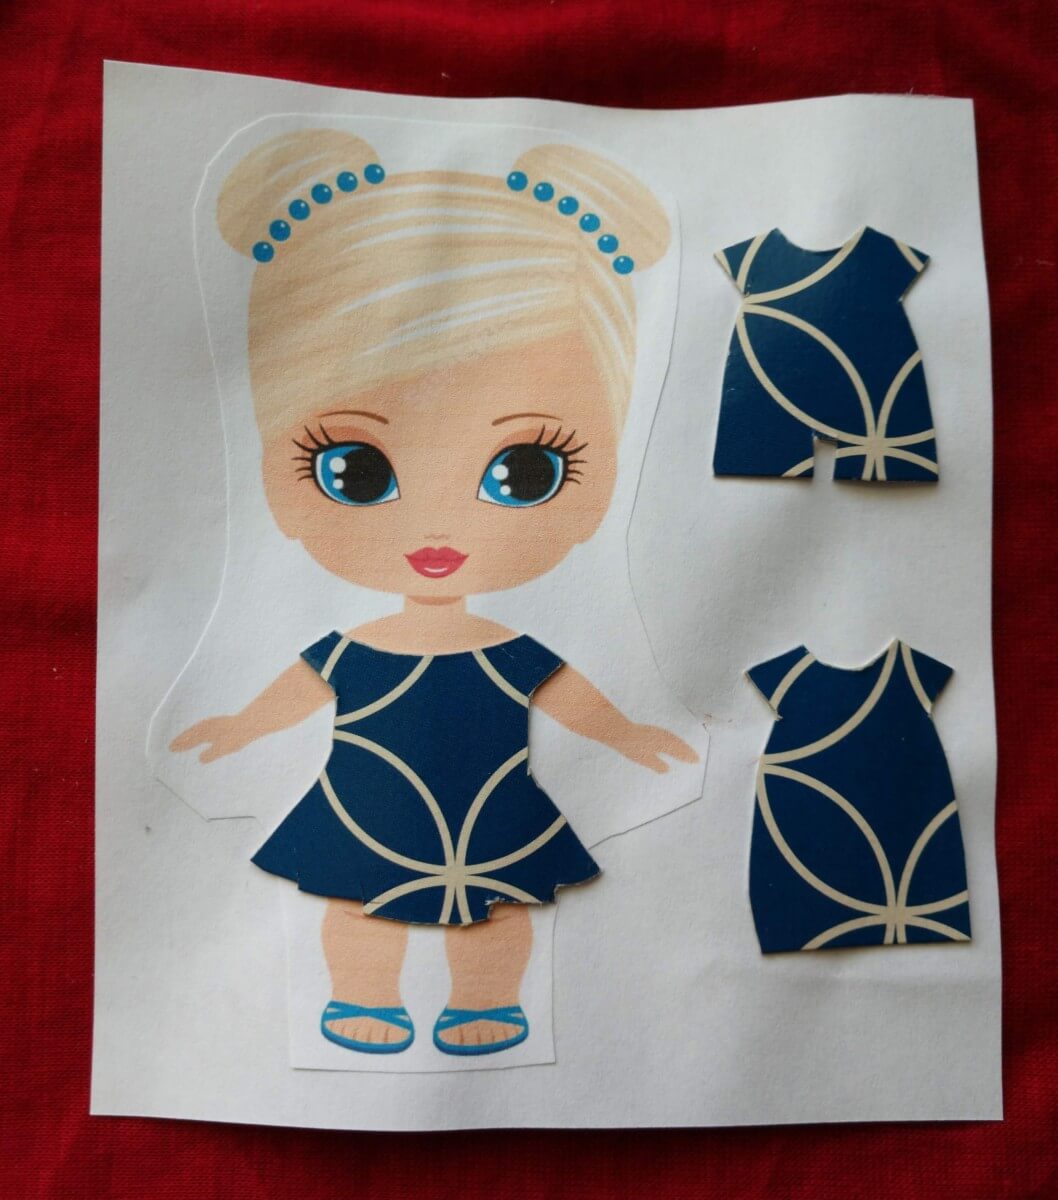 Creative Little Paper Doll Craft Idea Using Recycled Tissue Box